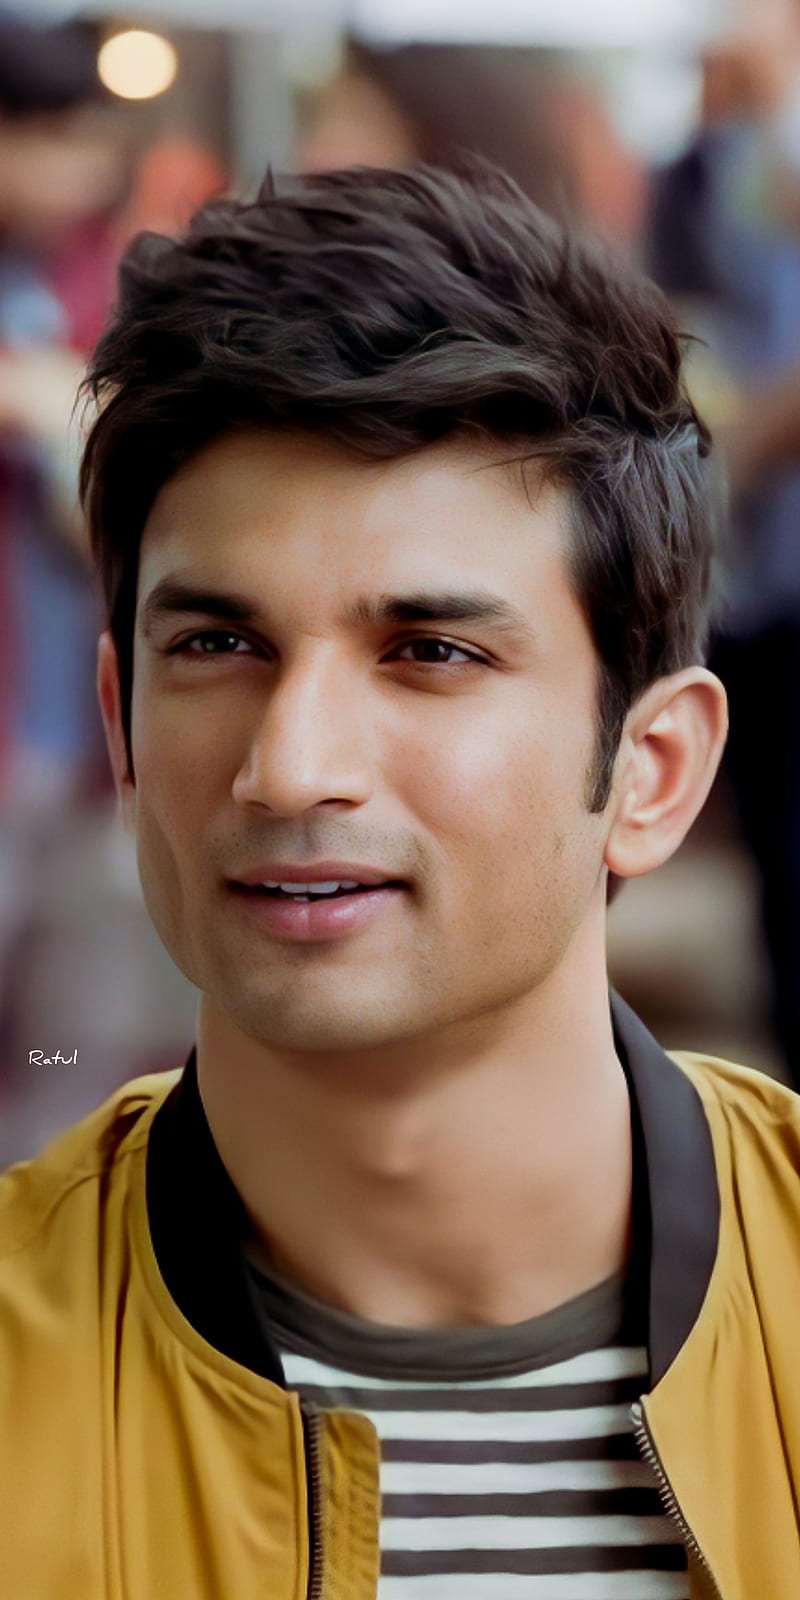 Incredible Compilation of Over 999 High-Quality 4K HD Images of Sushant Singh Rajput